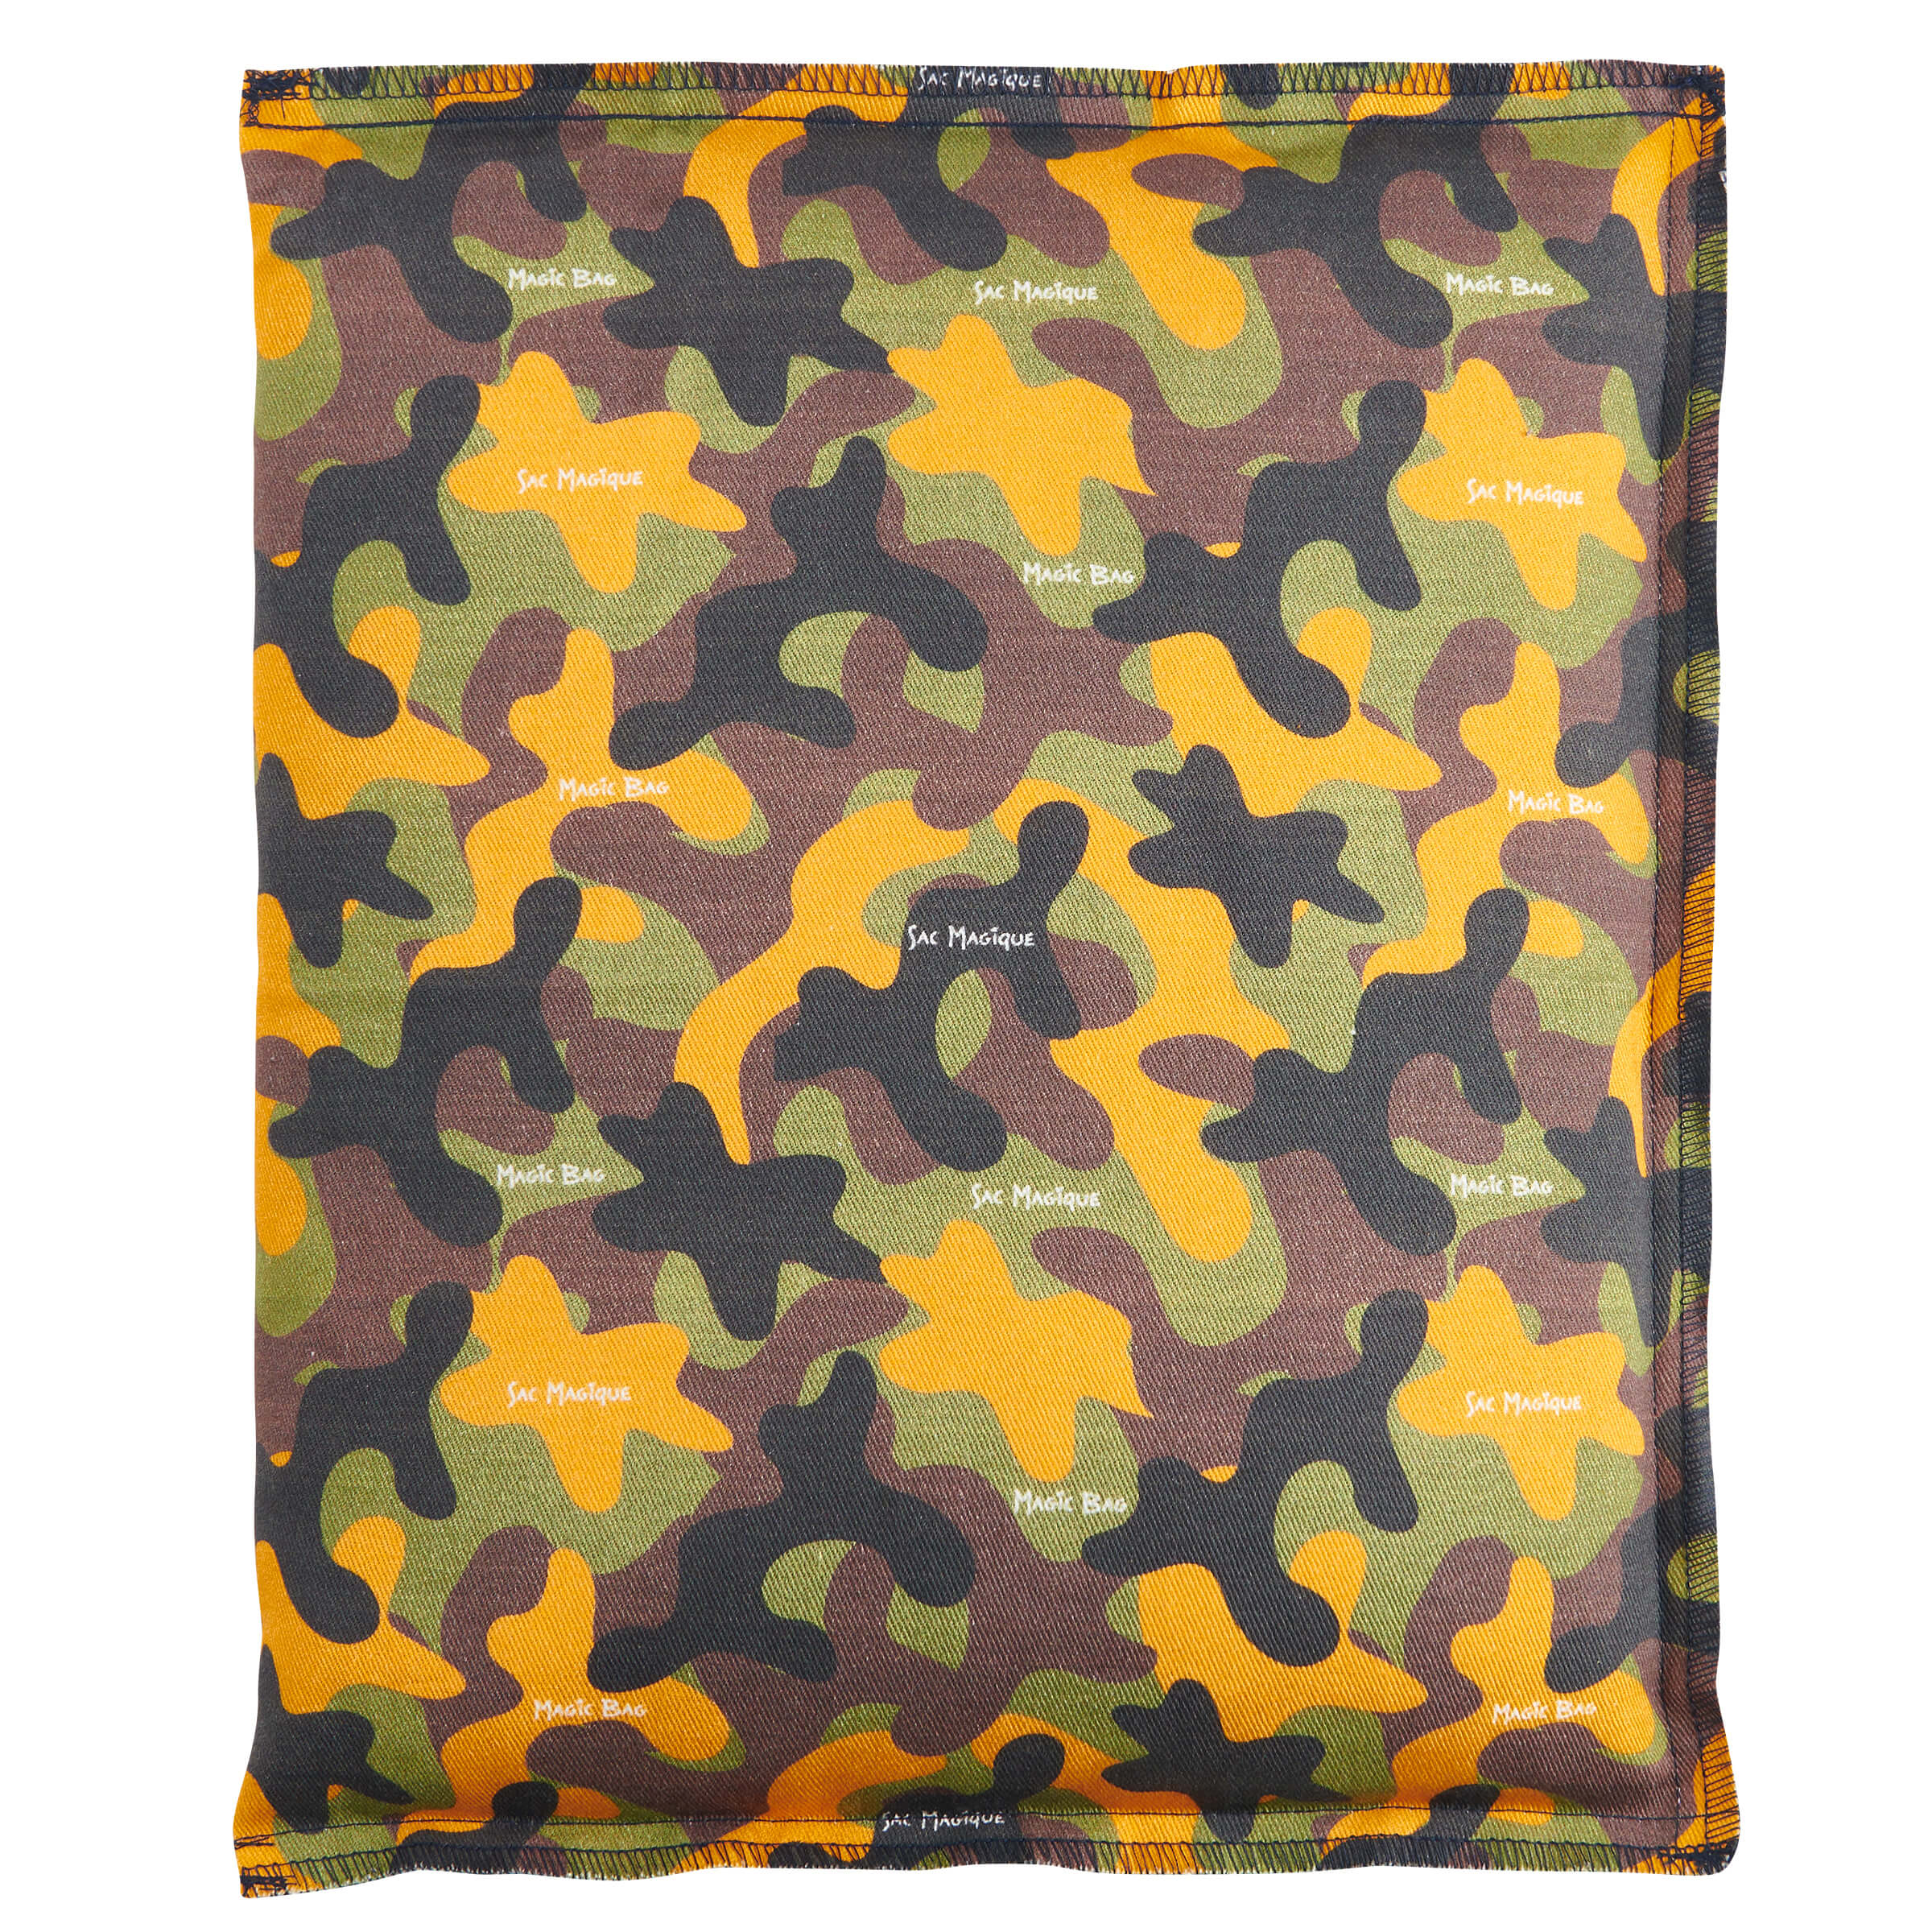 Limited Edition Pad: Camouflage